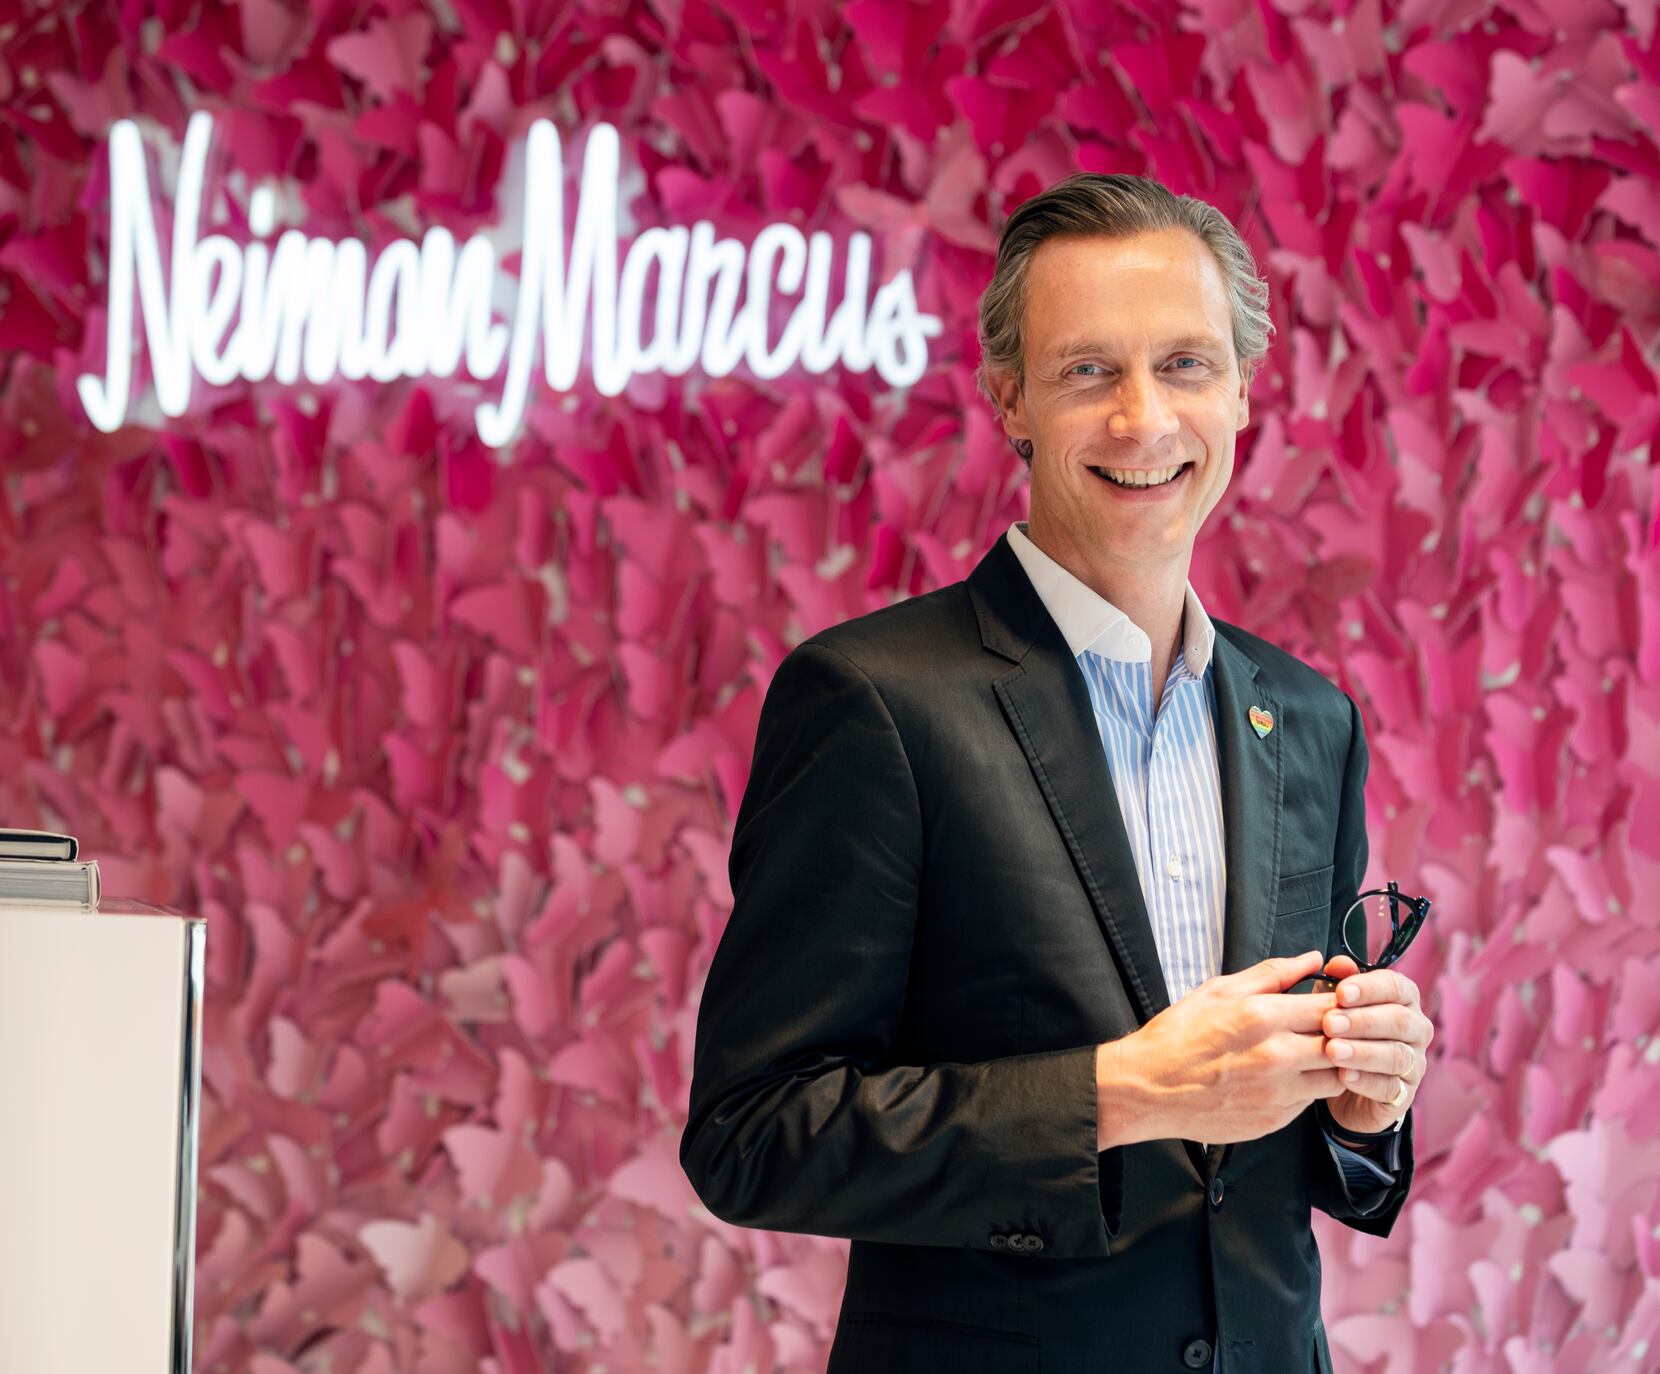 Neiman Marcus CEO blasted over 'snobbish' snub of less-wealthy shoppers